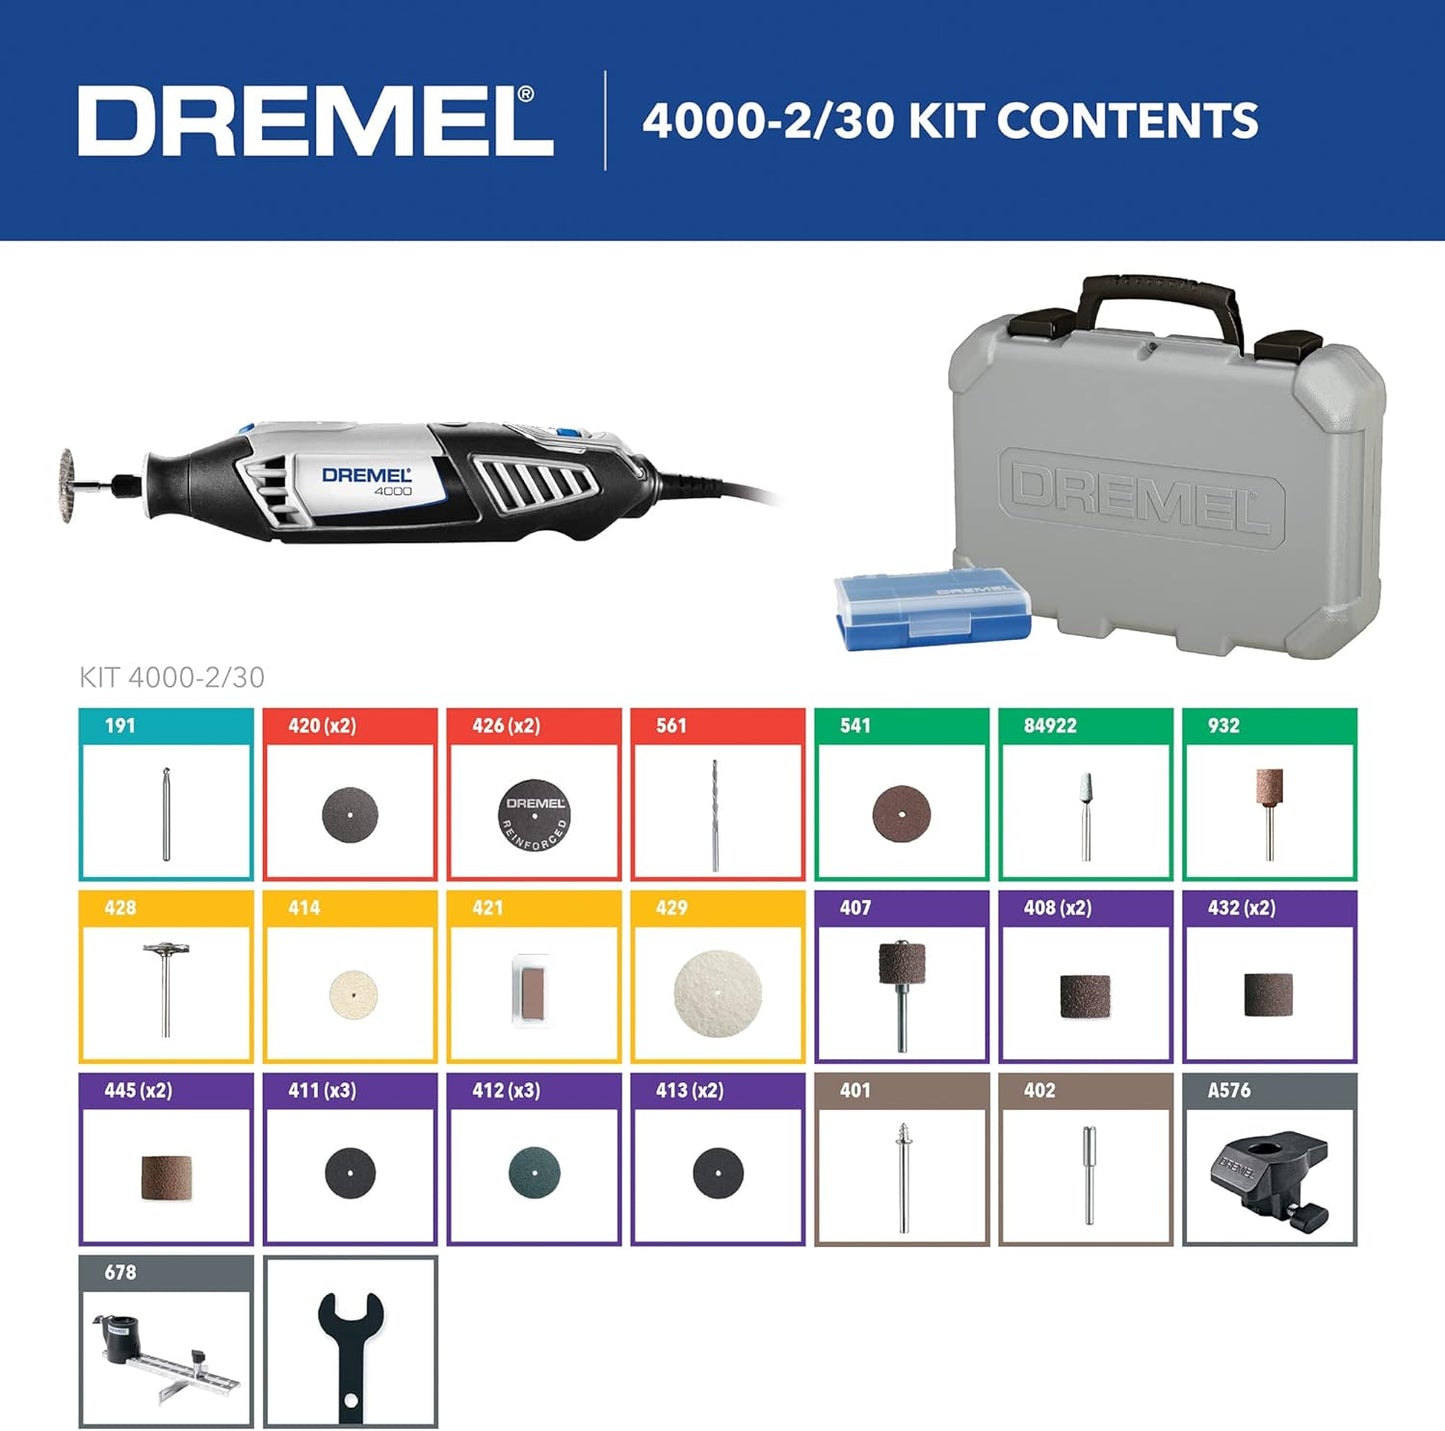 Dremel 4000 Rotary Tool Kit - Variable Speed, Engraver, Polisher, Sander,  and Accessories for Cutting, Sanding, Engraving, Carving, and Polishing